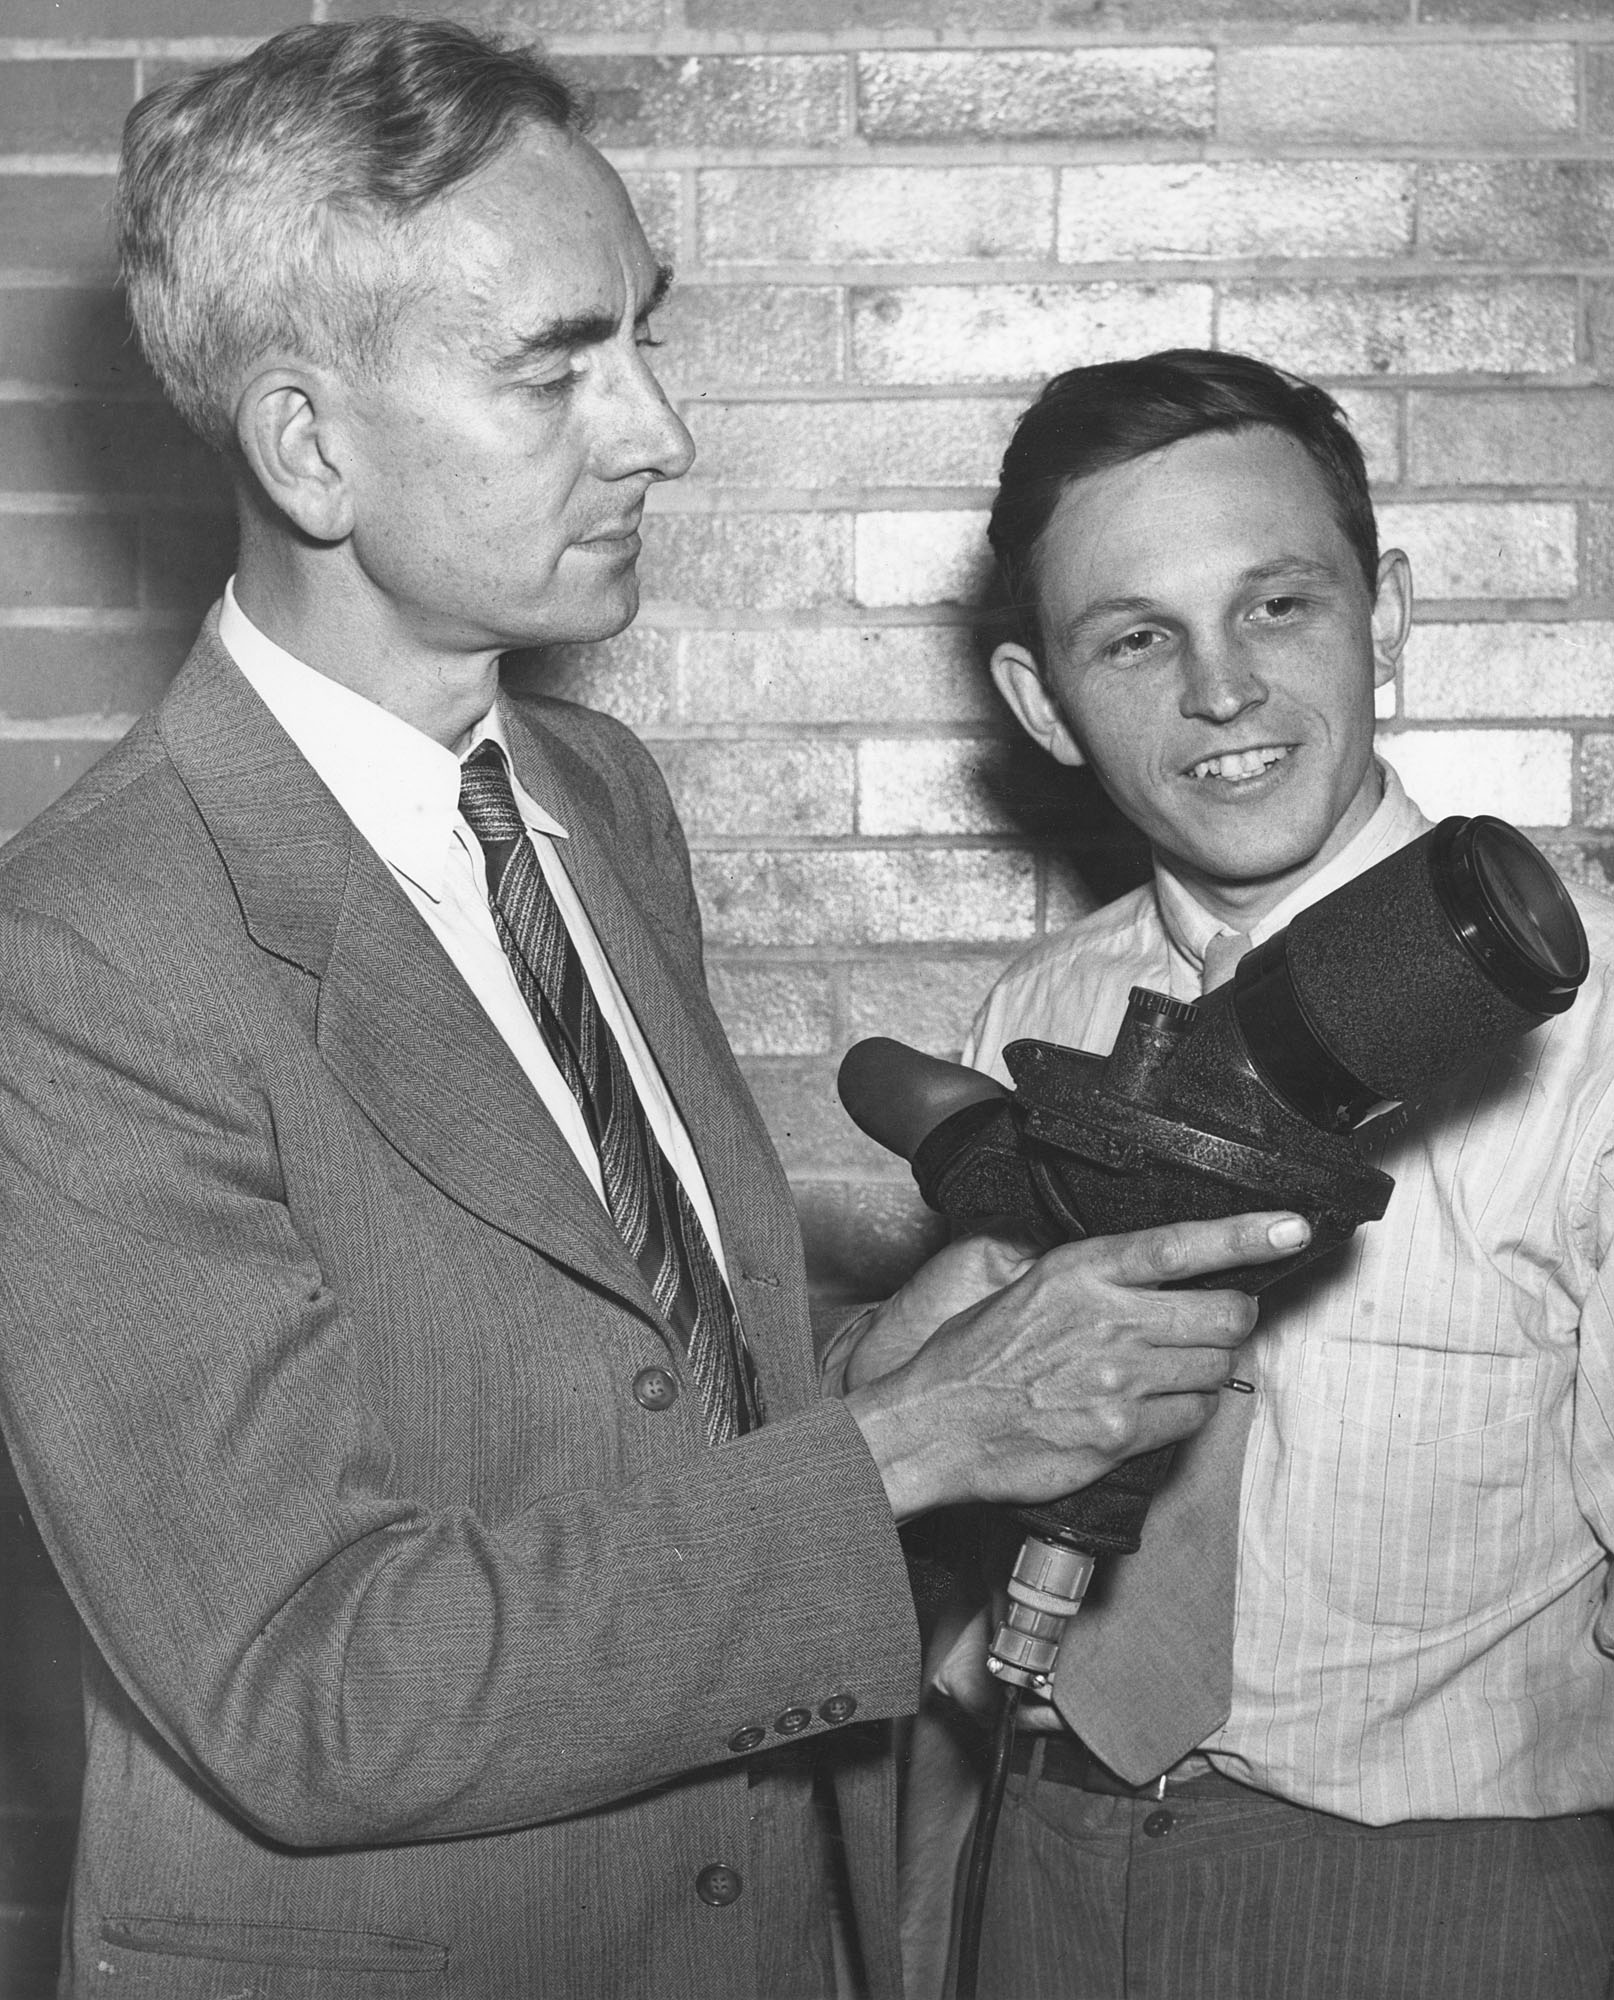 Institute of Optics Director Brian O’Brien (left) and Gordon Milne—a student at the time, later to become an Institute faculty member—looking at an Icaroscope, developed at the Institute. The device used phosphor to make the sun appear only 20 to 50 times brighter than the surrounding sky, compared to 10,000 times brighter to the naked eye. This helped antiaircraft gunners keep track of enemy planes diving with the full glare of the sun behind them. (University photo / Rare Books, Special Collections, and Preservation)